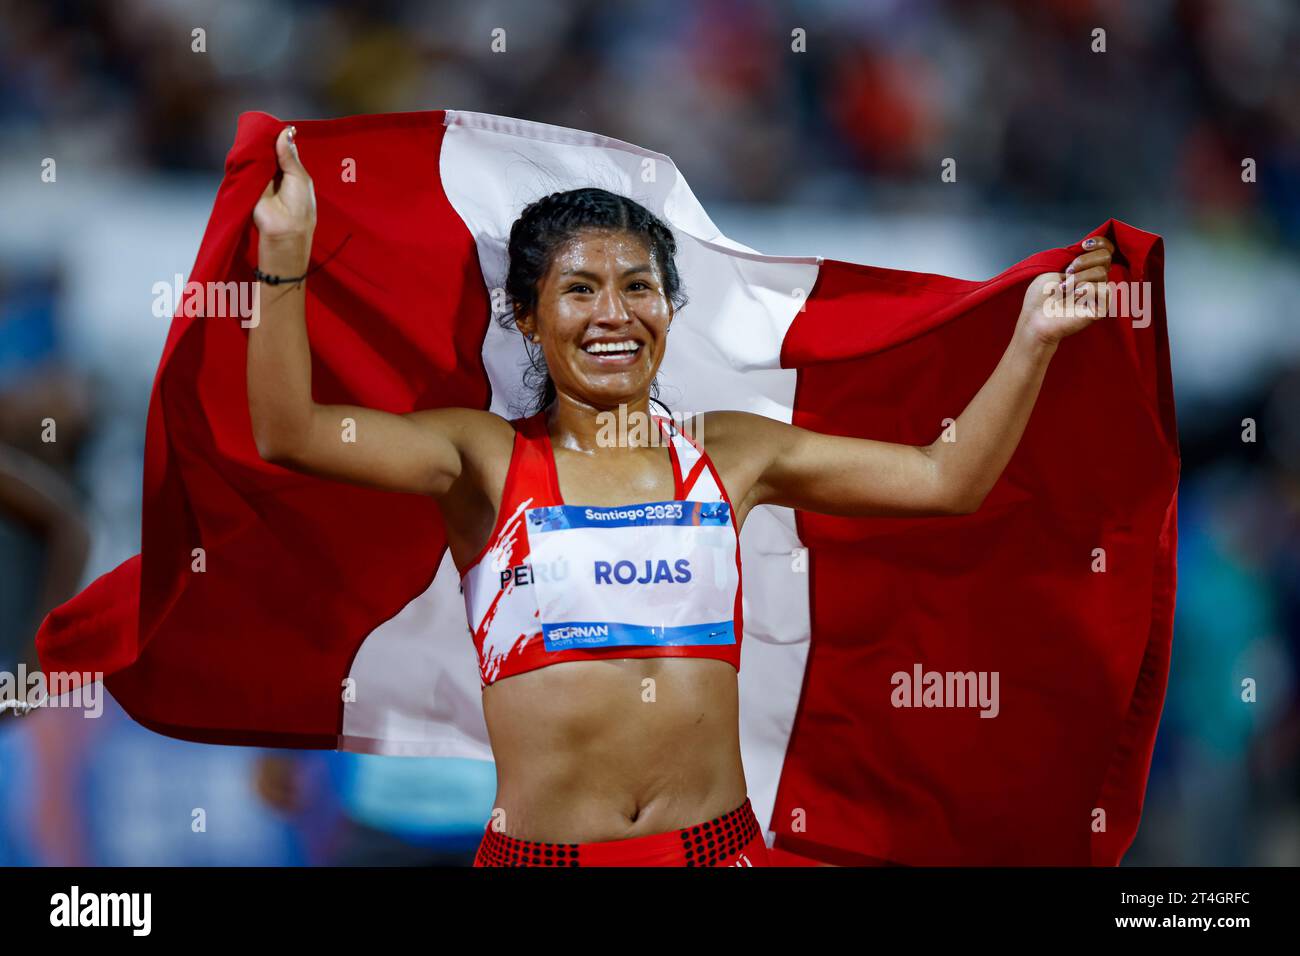 Luz Rojas, from team Peru, crosses the finish line first in the women's 10,000 m final at the Estadio Nacional de Chile, on day 10 of the Santiago 2023 Pan American Games, on October 30, 2023, in Santiago, Chile . ((134) Rodolfo Buhrer / La Imagem /  SPP) (Foto: Sports Press Photo/Sports Press Photo/C - ONE HOUR DEADLINE - ONLY ACTIVATE FTP IF IMAGES LESS THAN ONE HOUR OLD - Alamy) Stock Photo